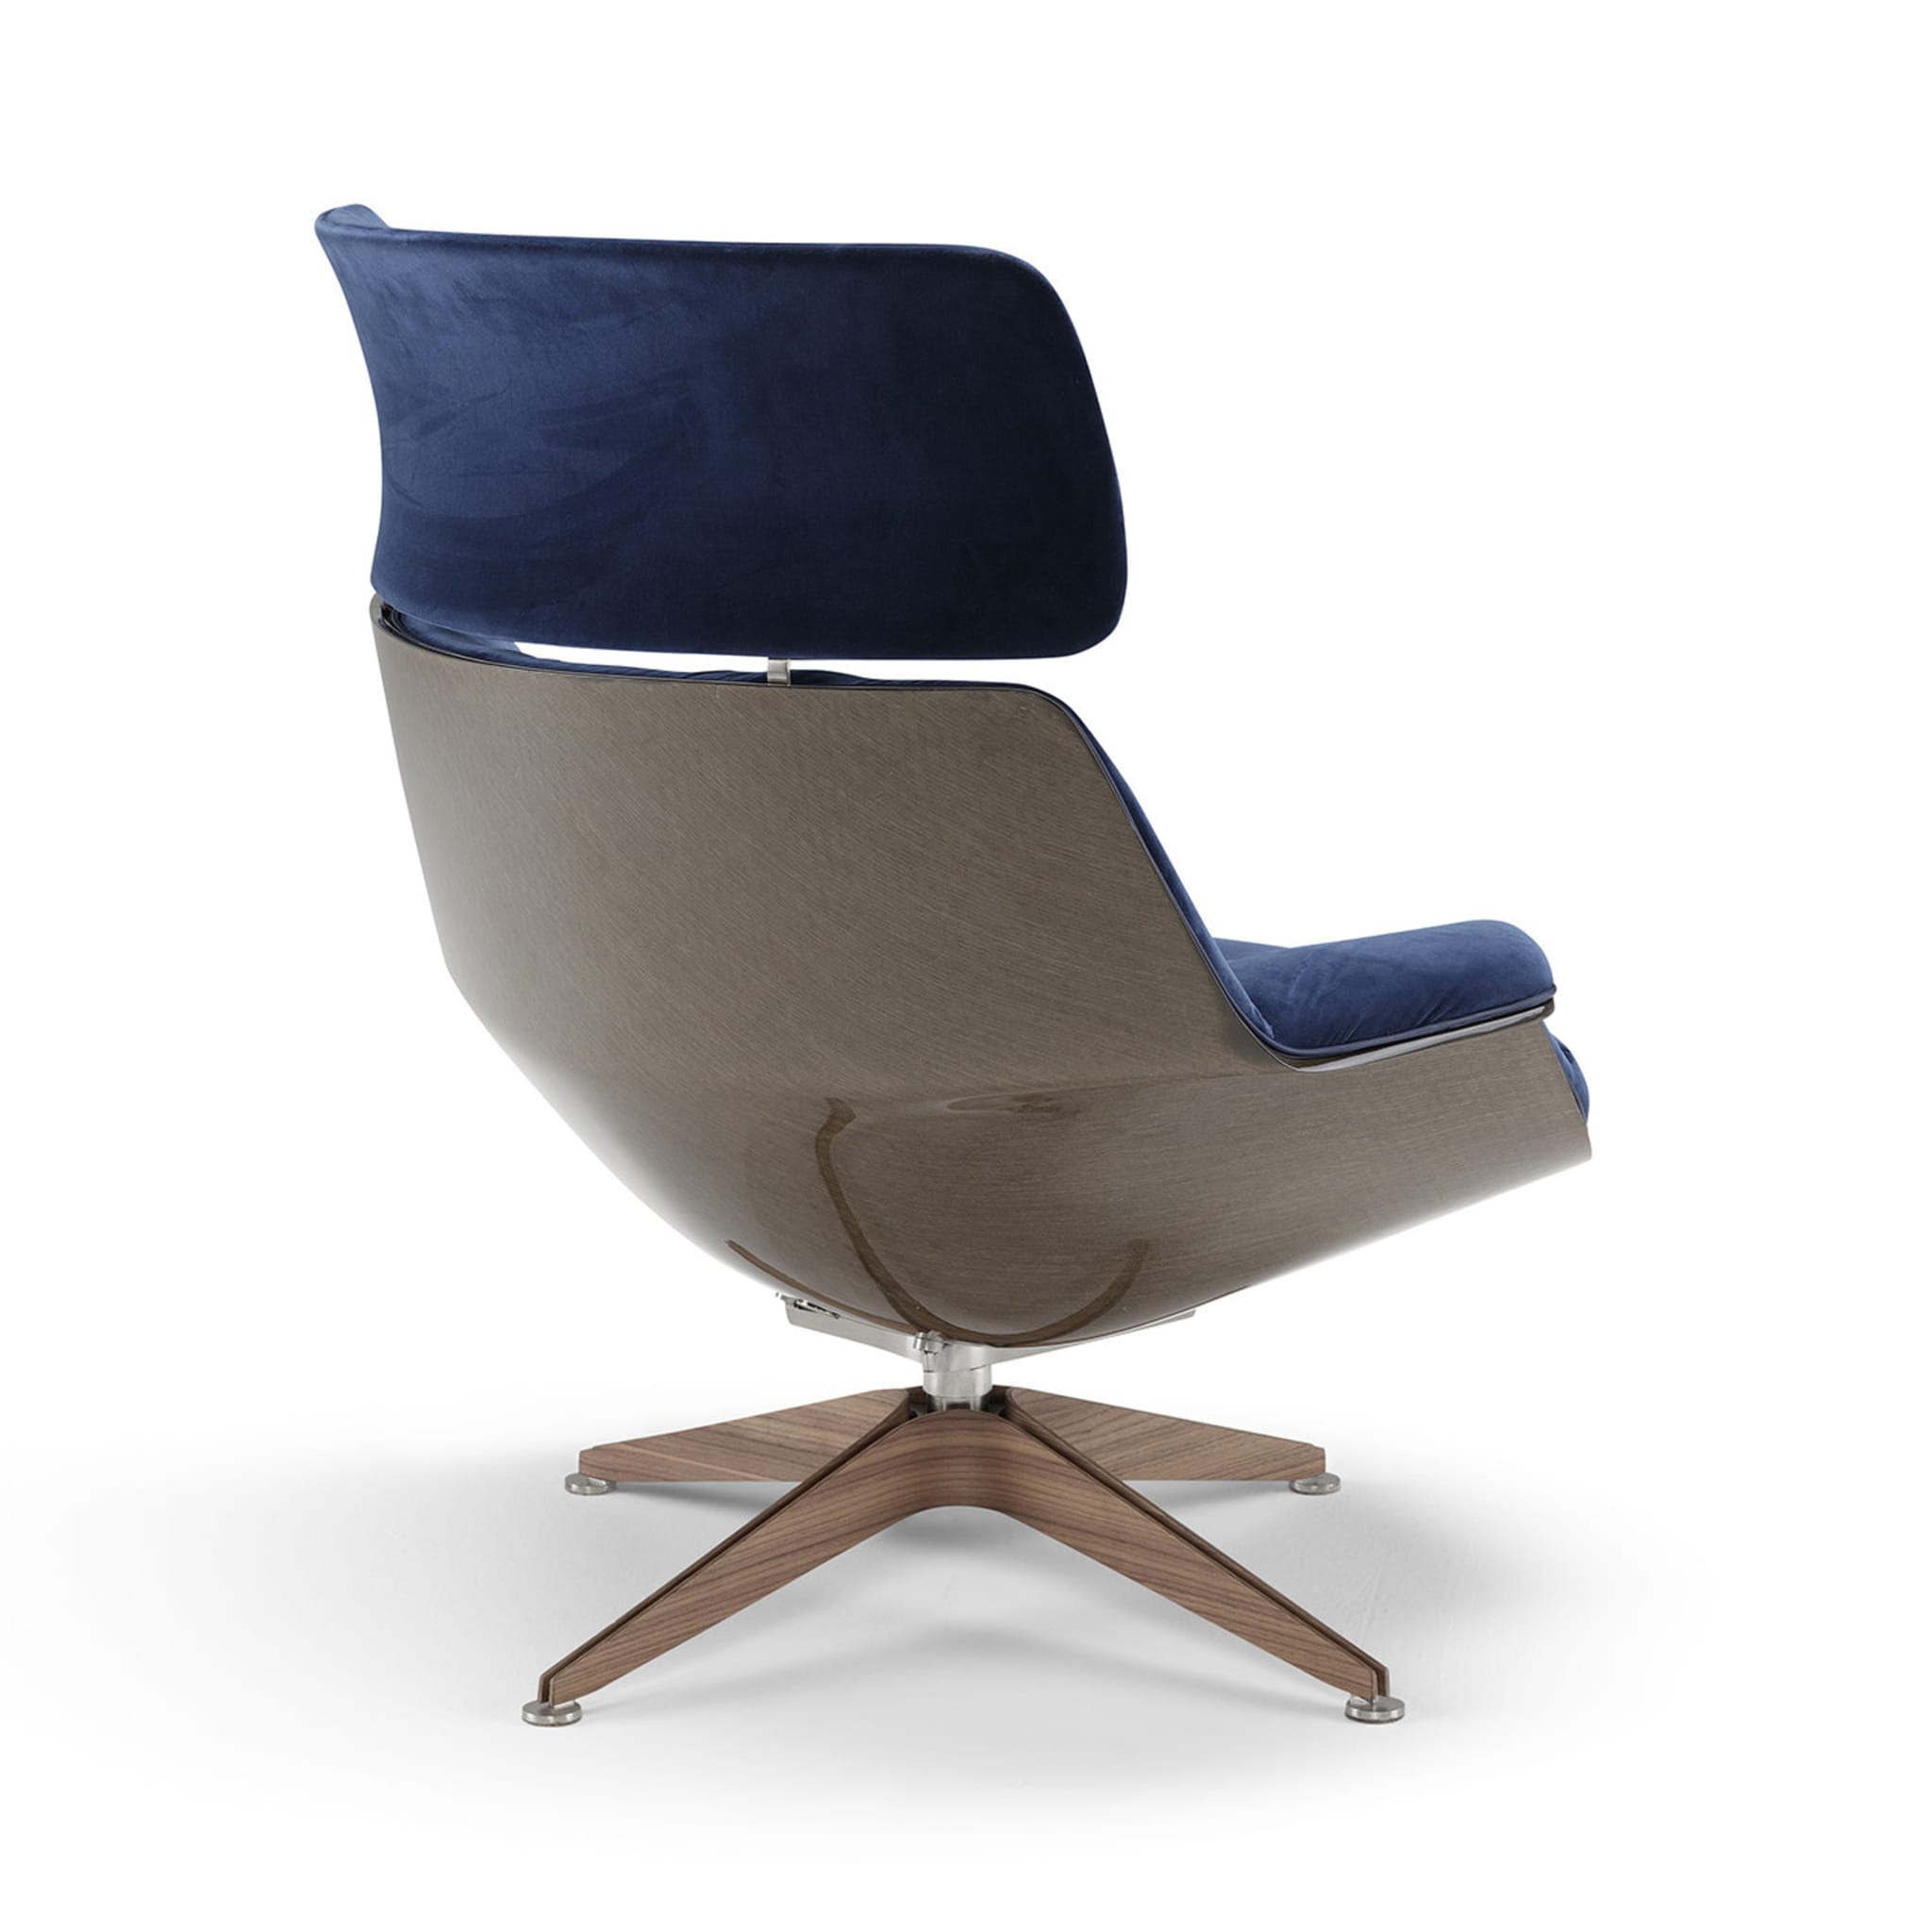 Coach Lounge Chair and Footrest by Jean Marie Massaud - Alternative view 4